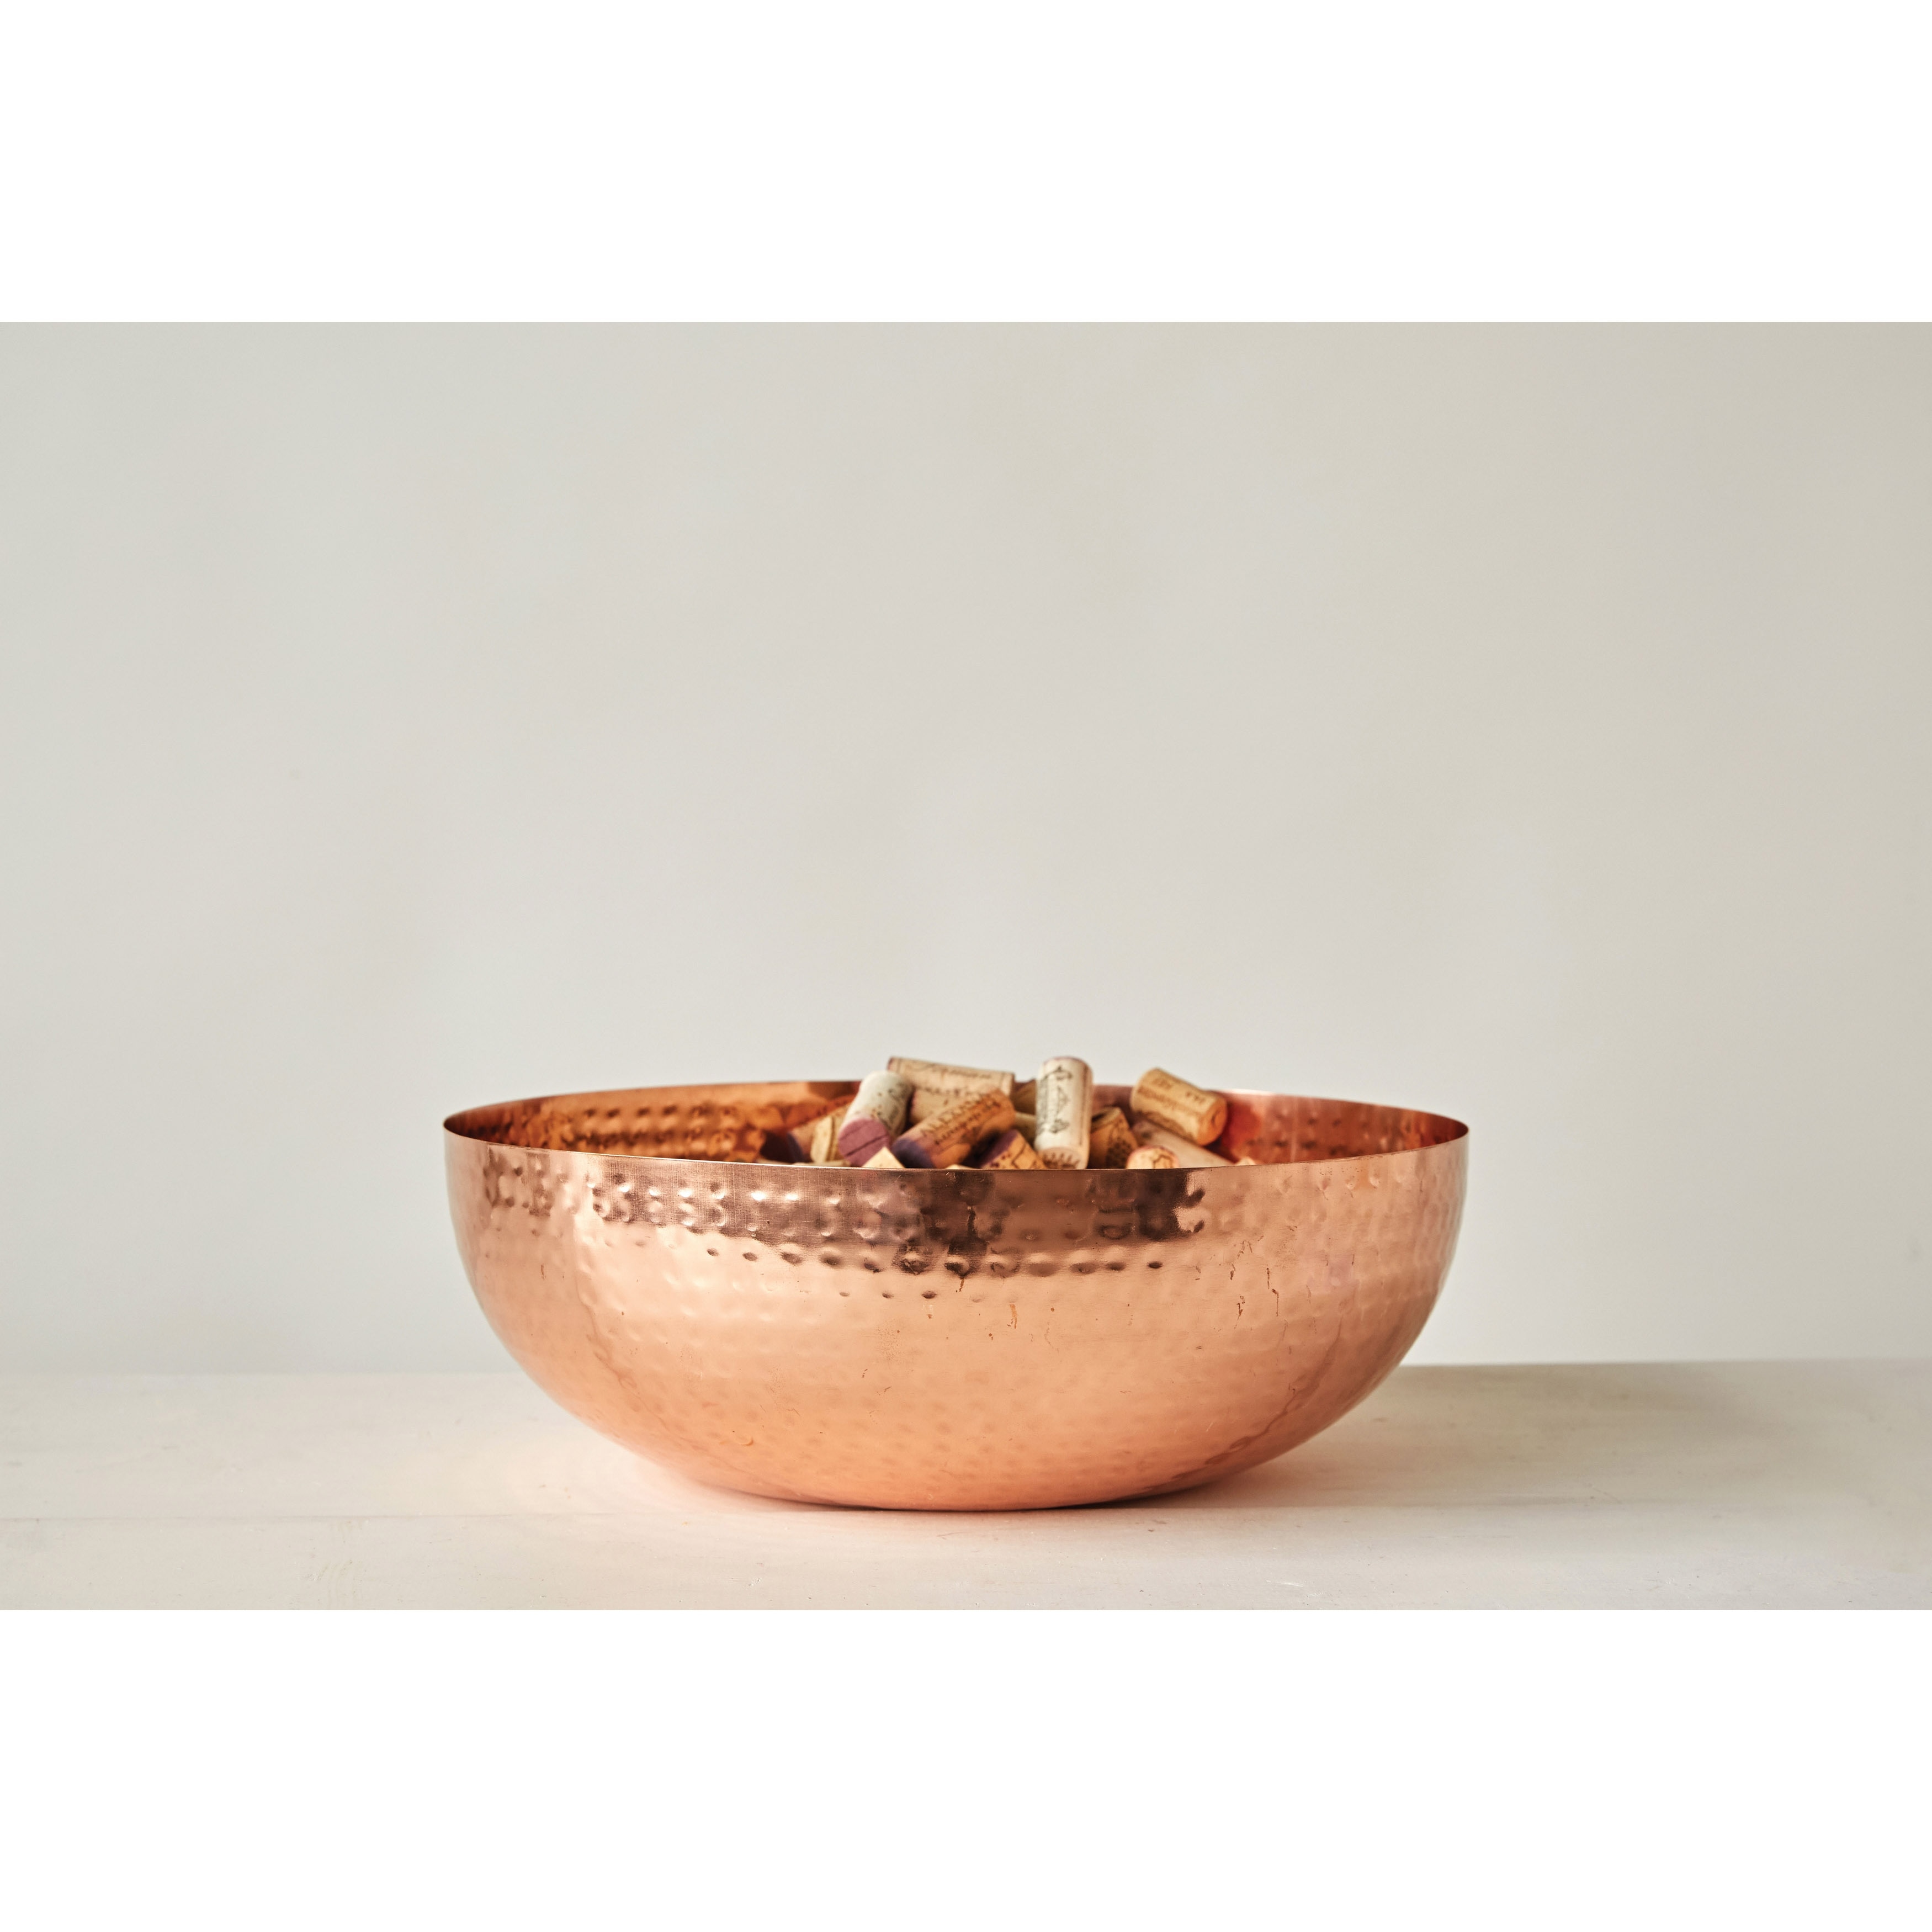 https://ak1.ostkcdn.com/images/products/is/images/direct/62d470038835f32fd944b2bf04eccd8989ef8d35/Hammered-Metal-Bowl-with-Copper-Finish.jpg